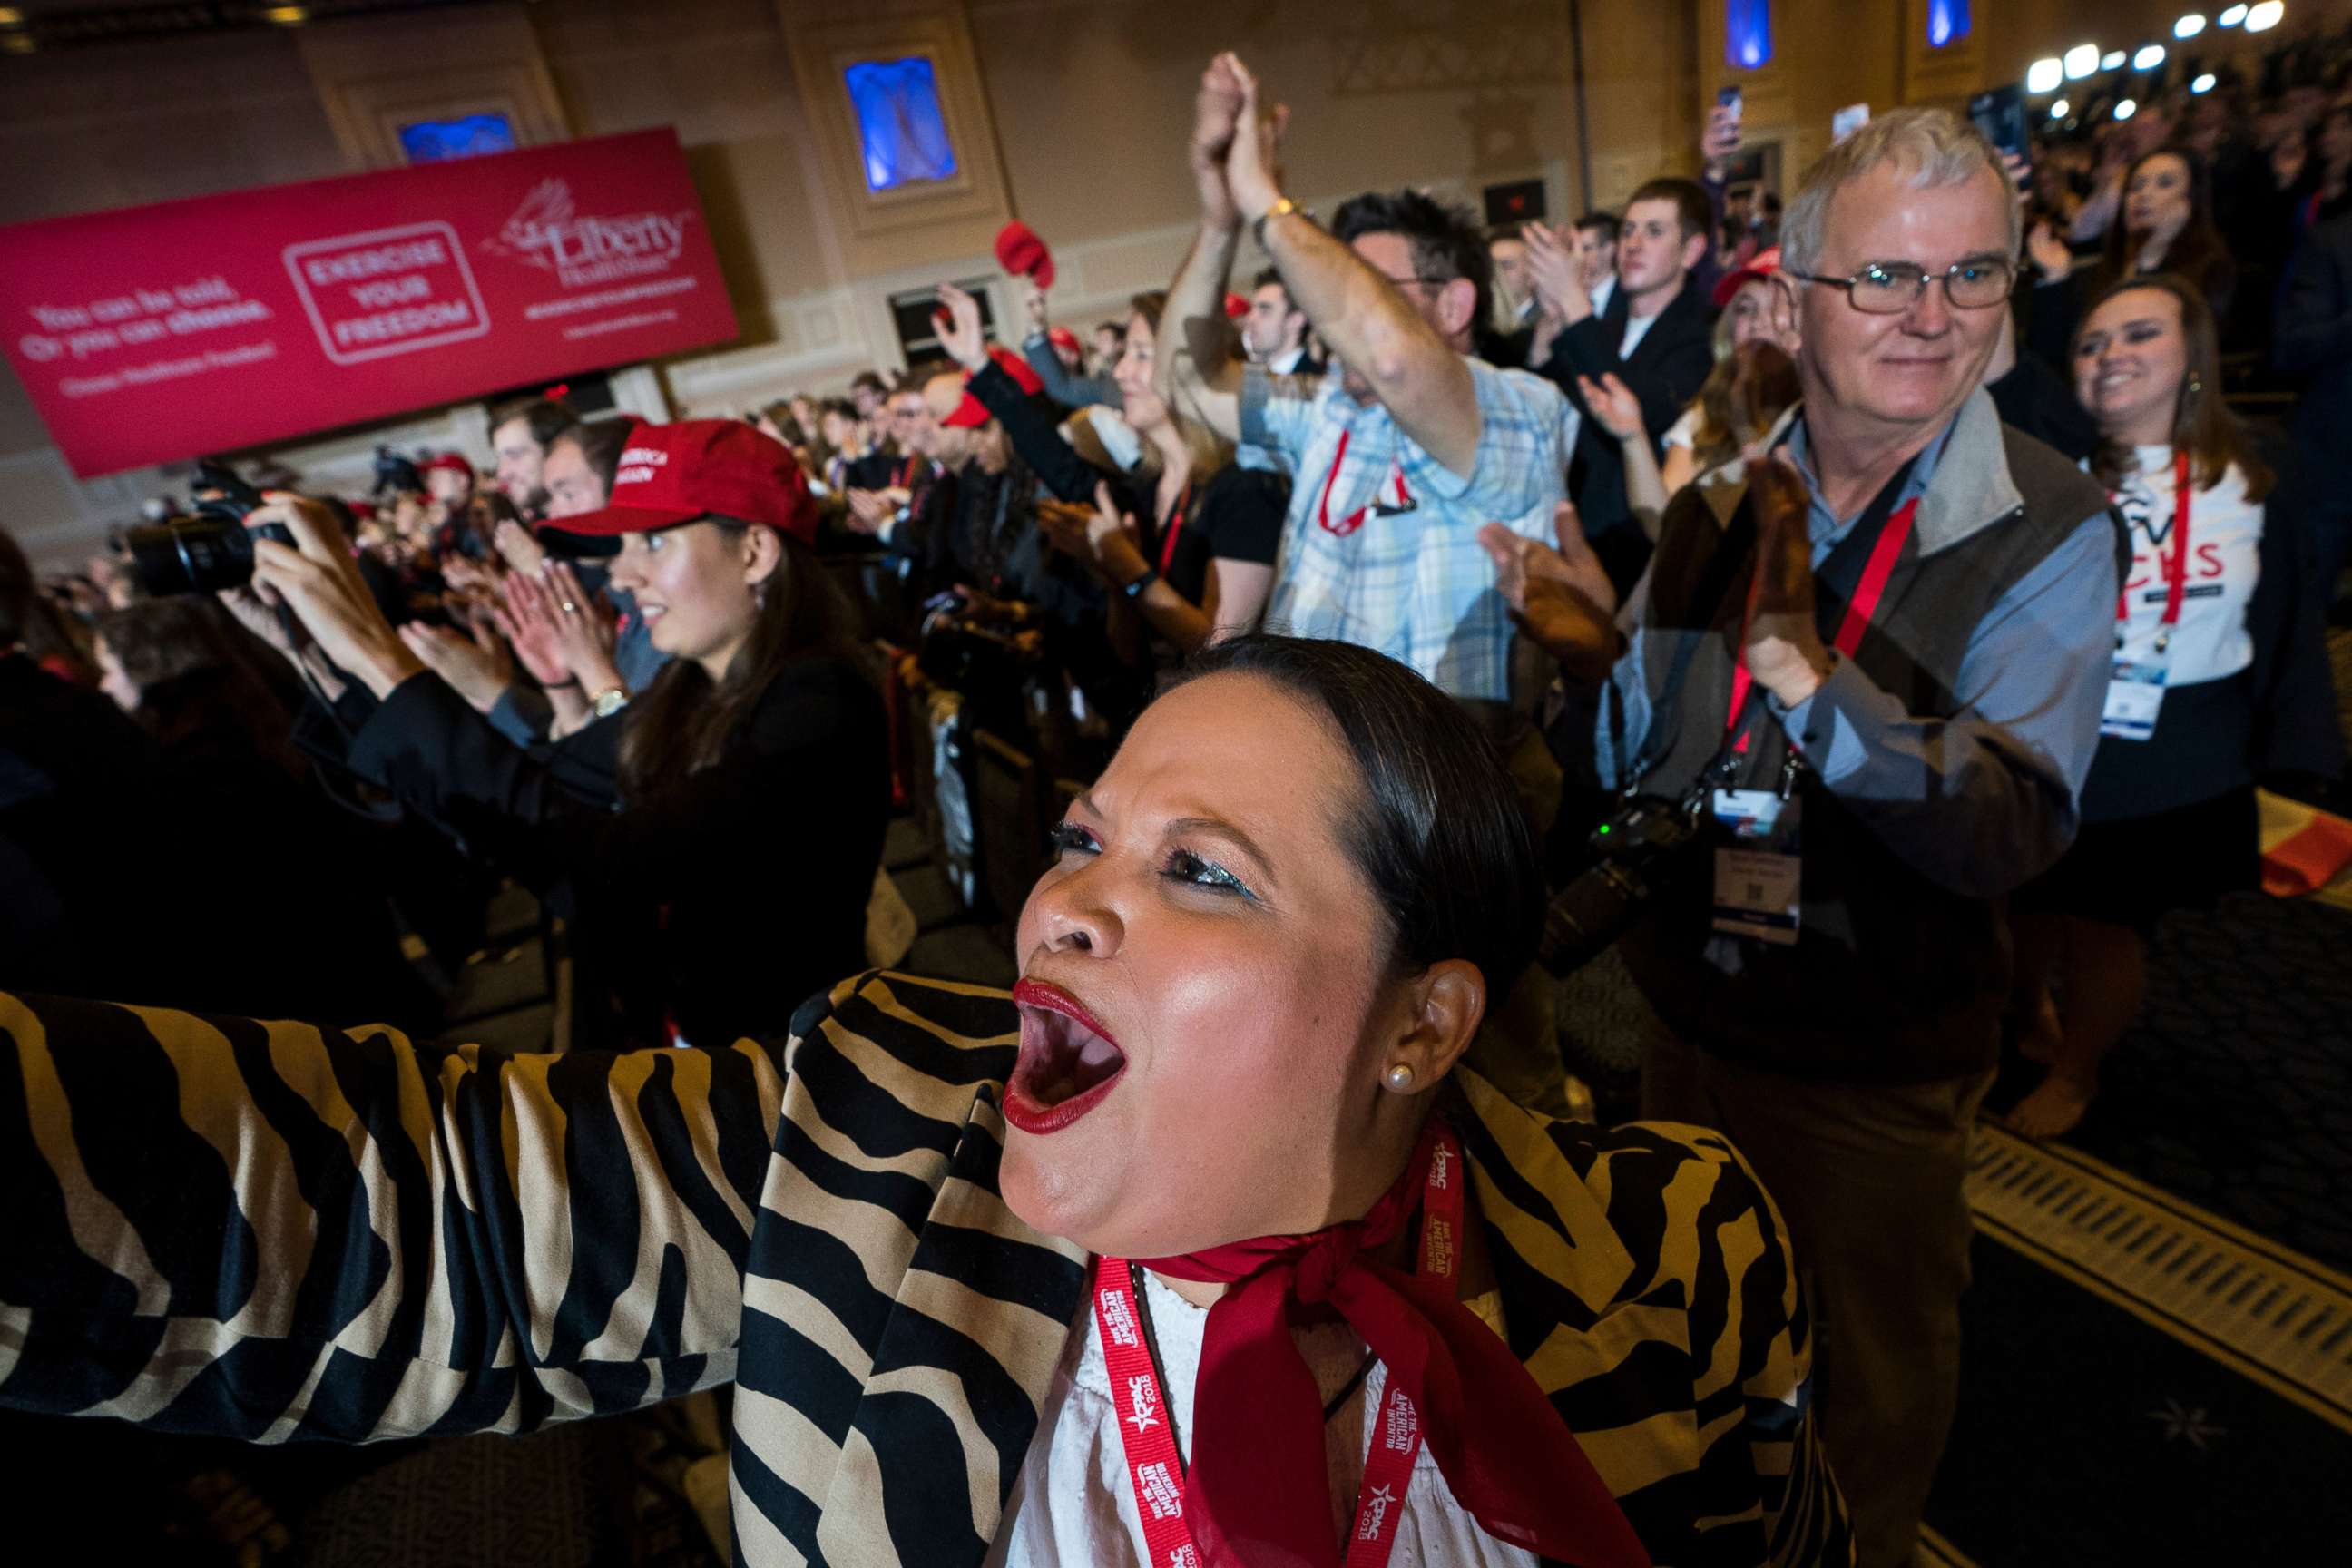 PHOTO: Ana Veronica Lacayo cheers as President Donald Trump addresses the Conservative Political Action Conference in National Harbor, Md., Feb. 23, 2018.